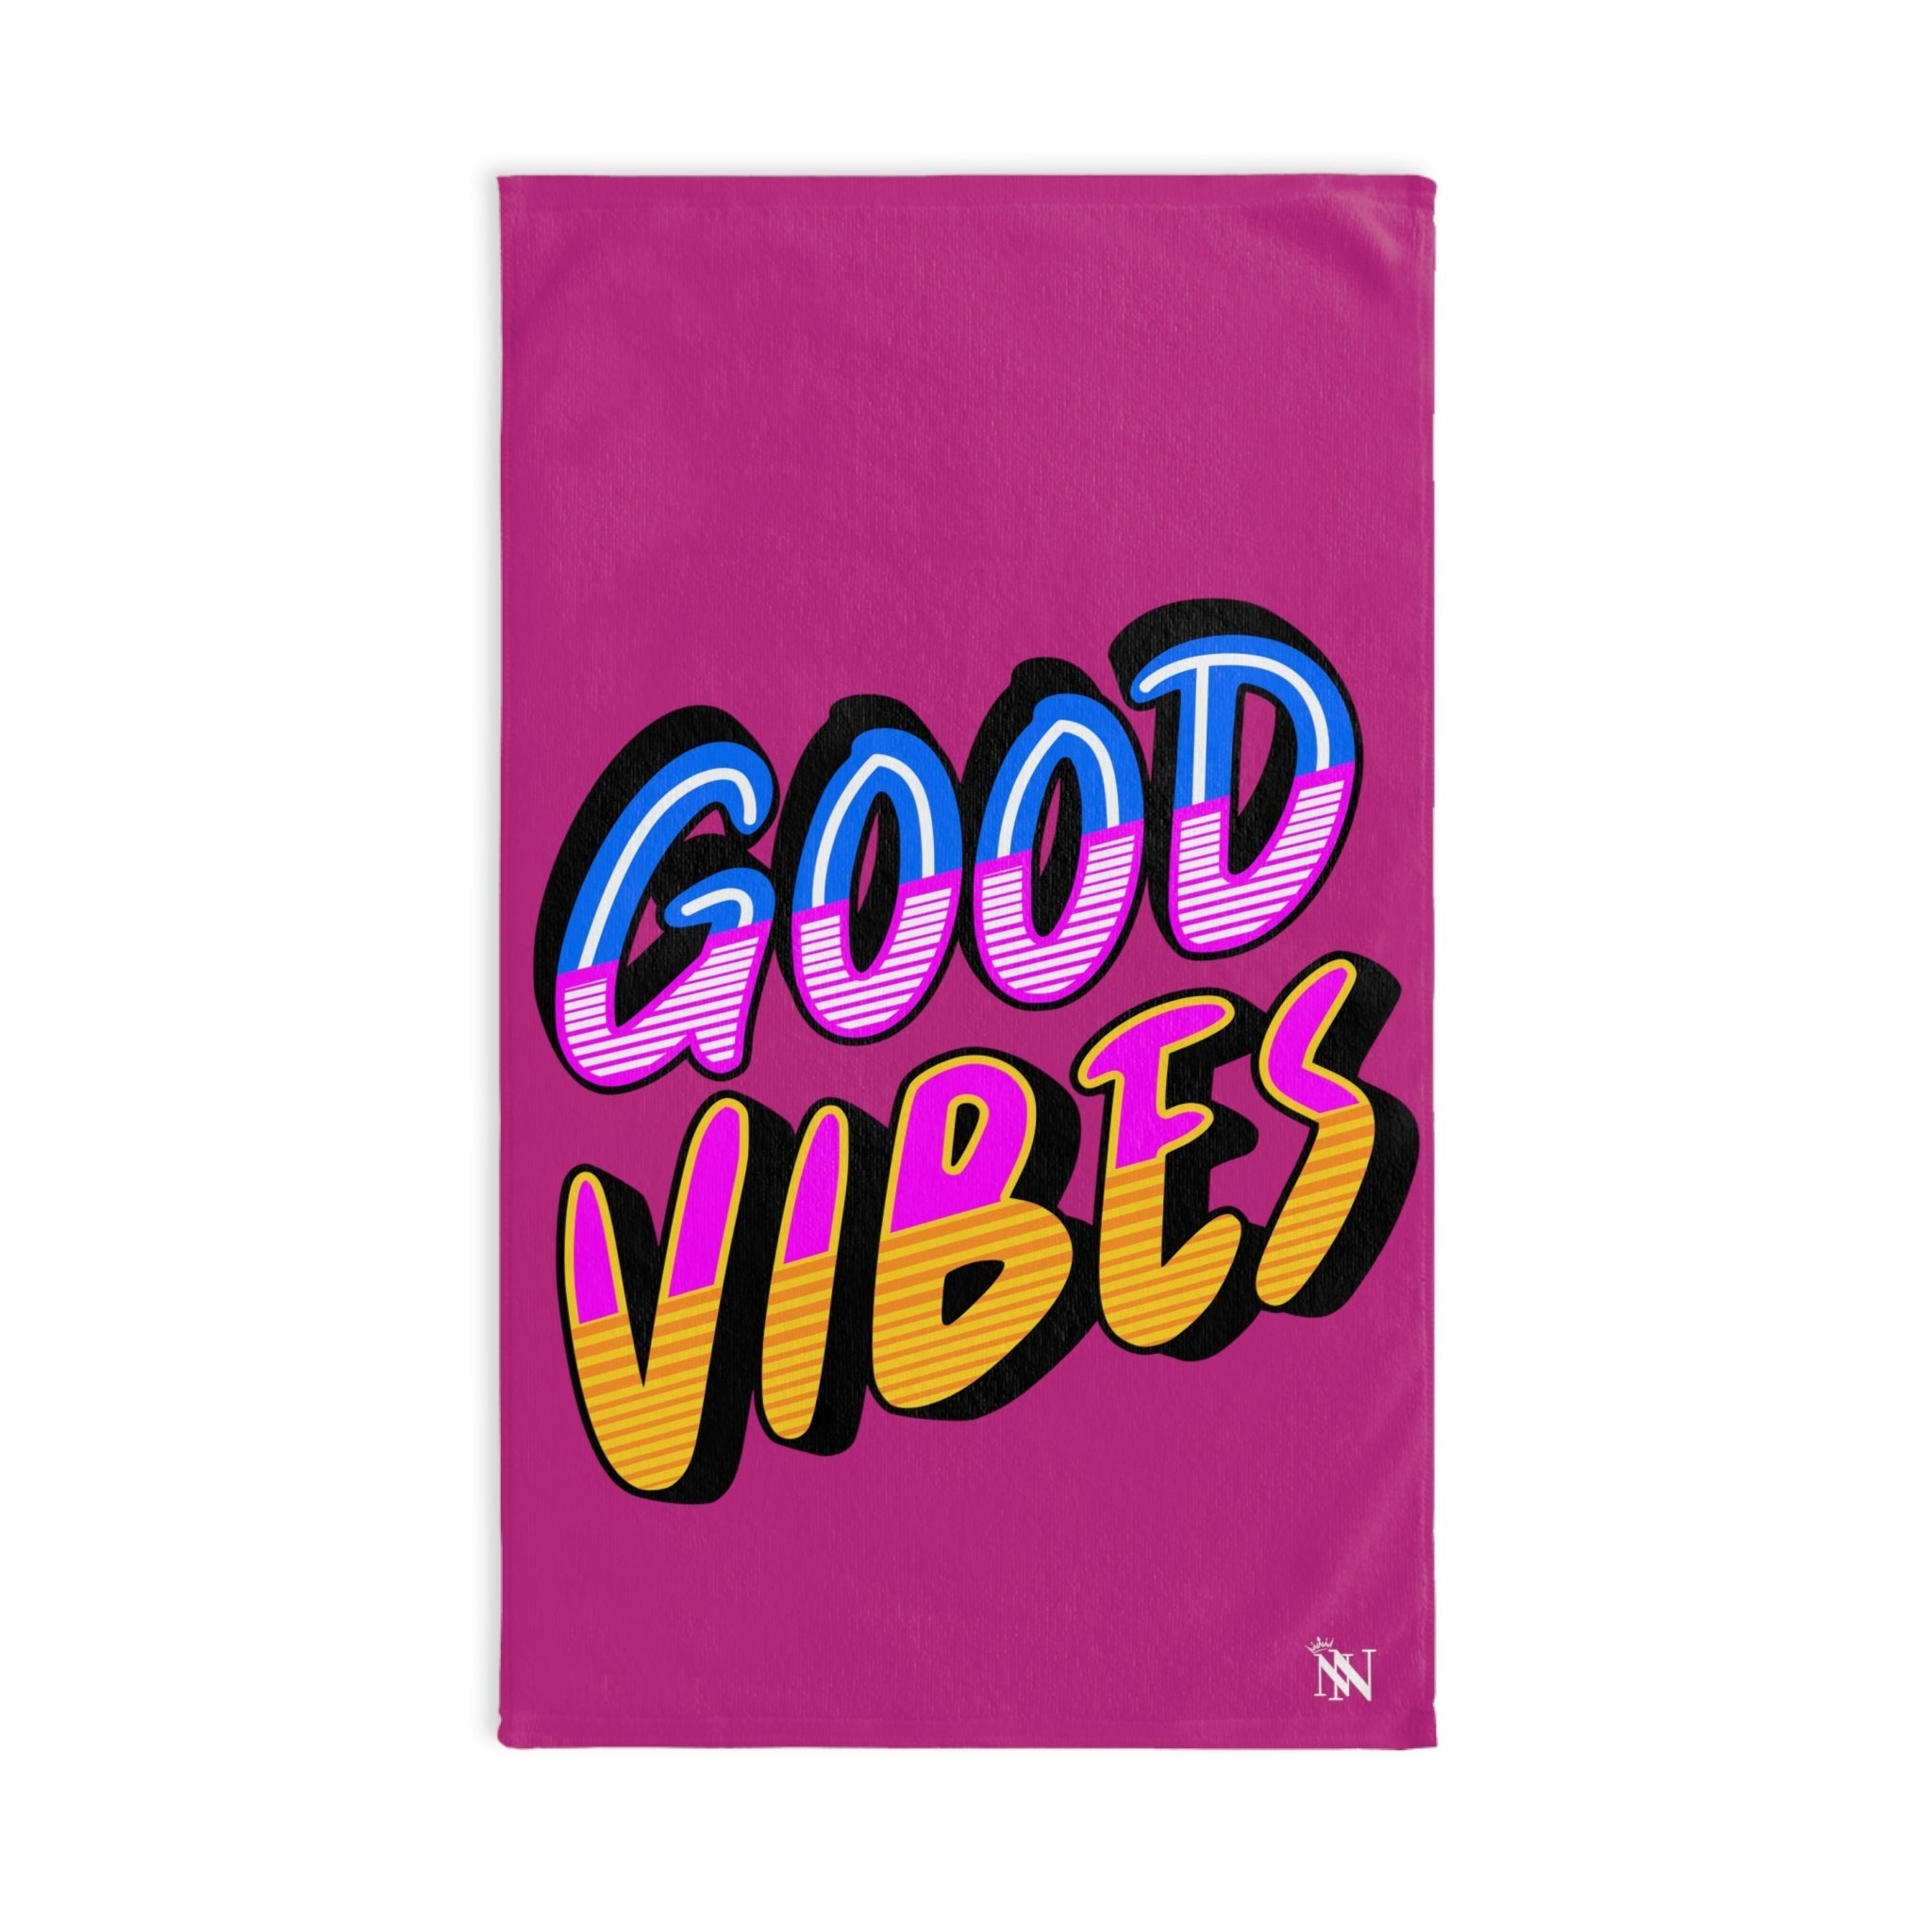 Neon Rainbow Vibes Fuscia | Funny Gifts for Men - Gifts for Him - Birthday Gifts for Men, Him, Husband, Boyfriend, New Couple Gifts, Fathers & Valentines Day Gifts, Hand Towels NECTAR NAPKINS